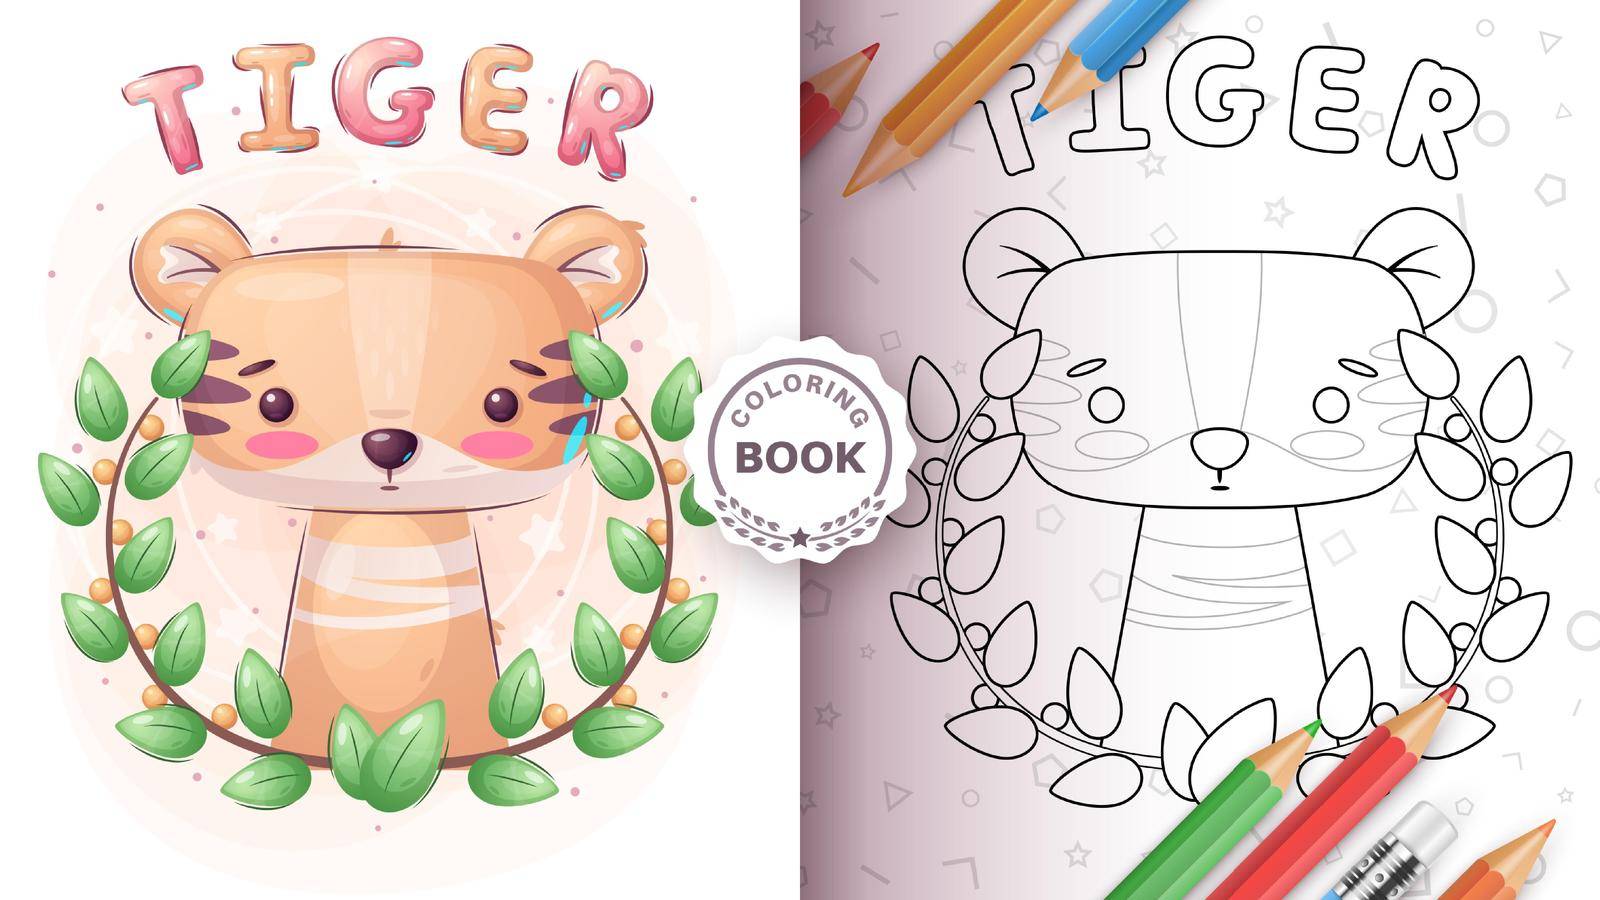 Tiger in forest - coloring book by rwgusev